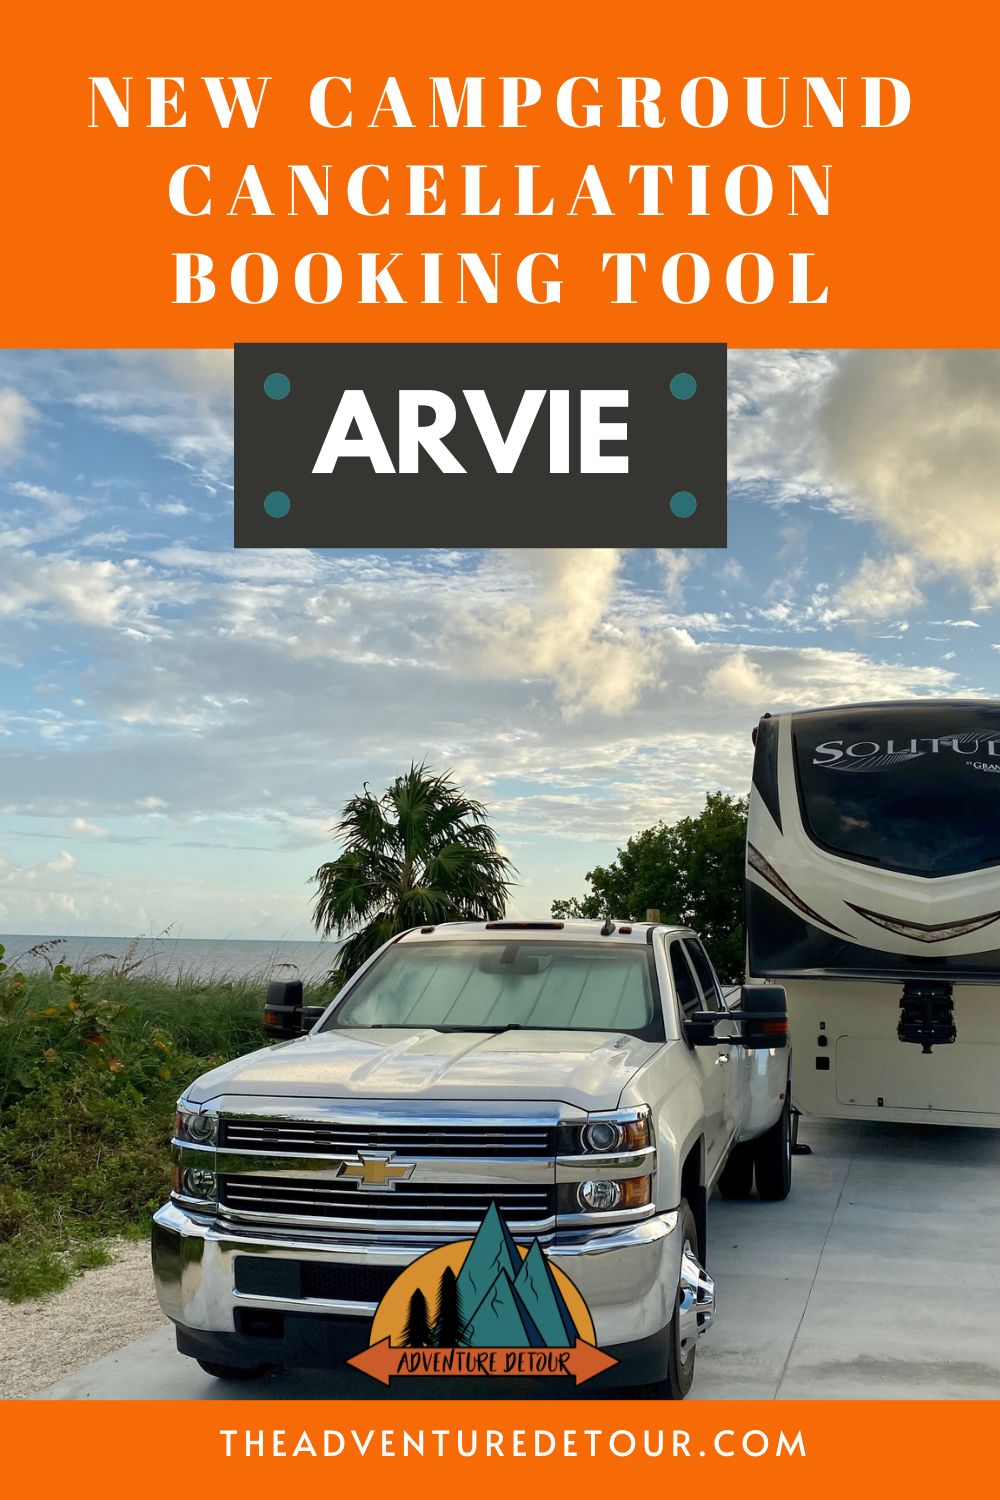 RV state park camping on the ocean - Arvie camping cancellations